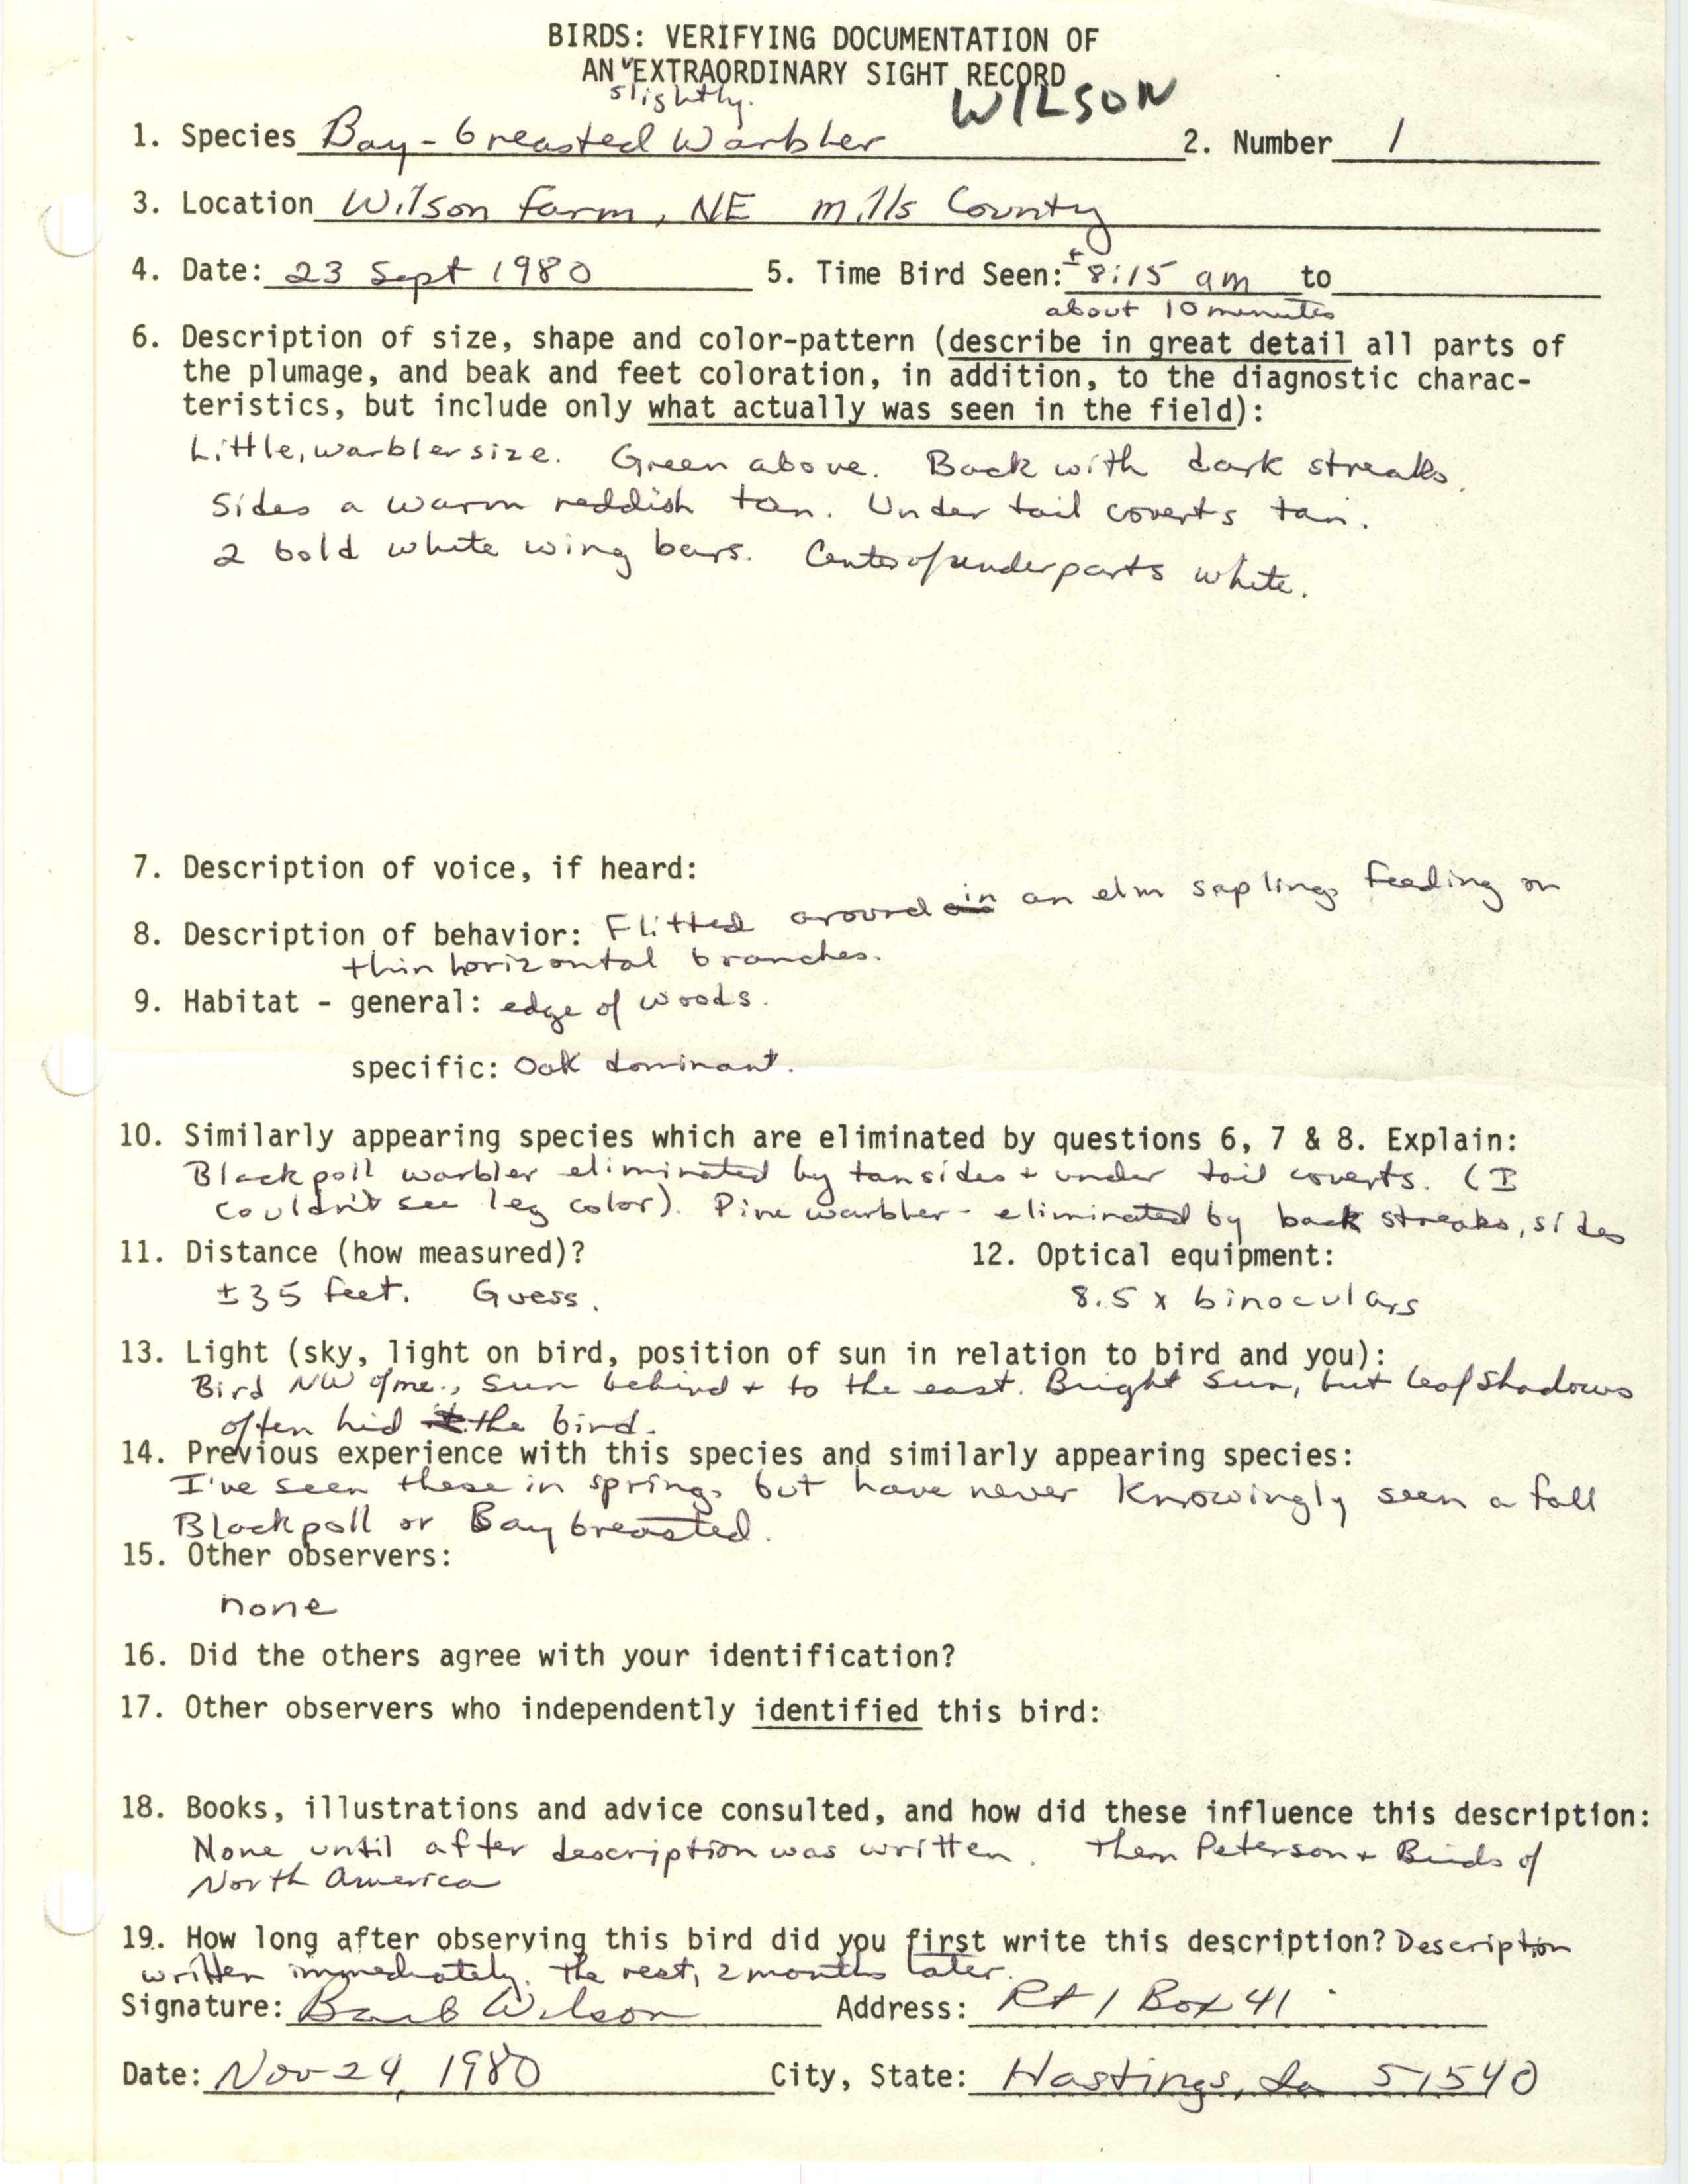 Rare bird documentation form for Bay-breasted Warbler in Mills County, 1980